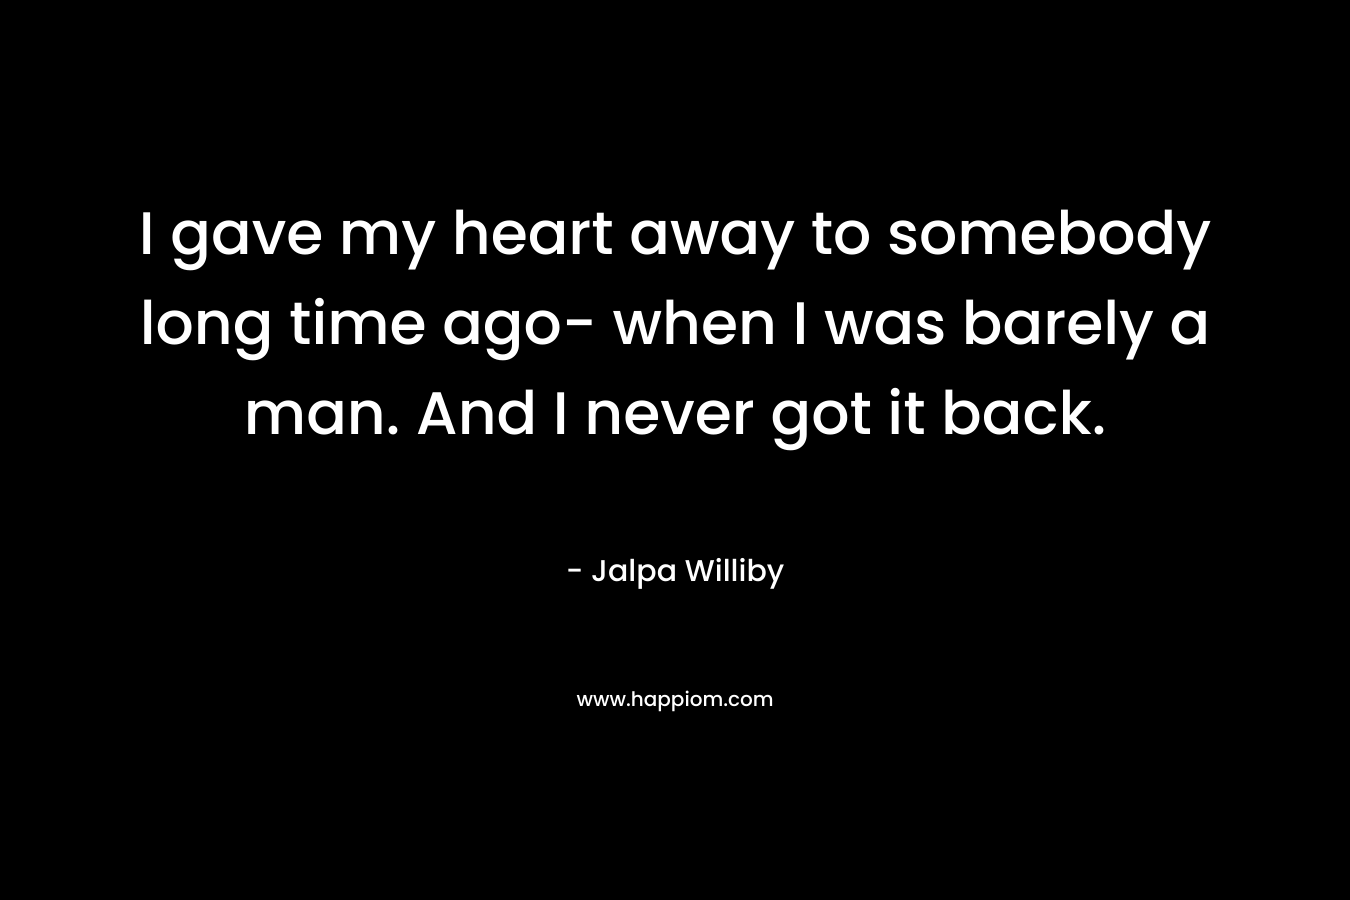 I gave my heart away to somebody long time ago- when I was barely a man. And I never got it back. – Jalpa Williby